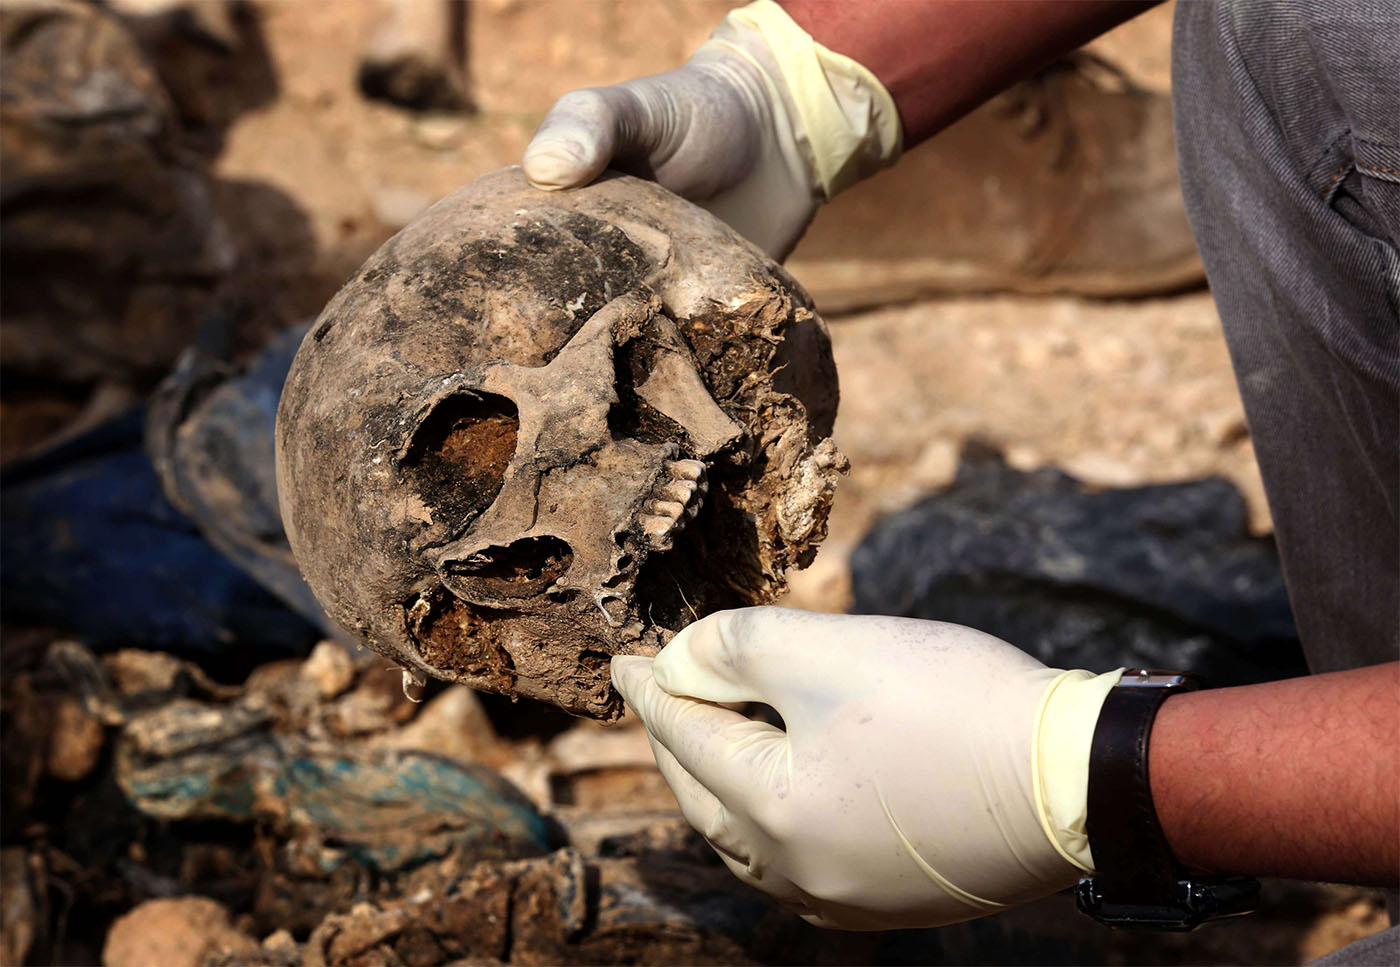 More than 200 mass graves containing up to 12,000 bodies have been recently discovered in Iraq